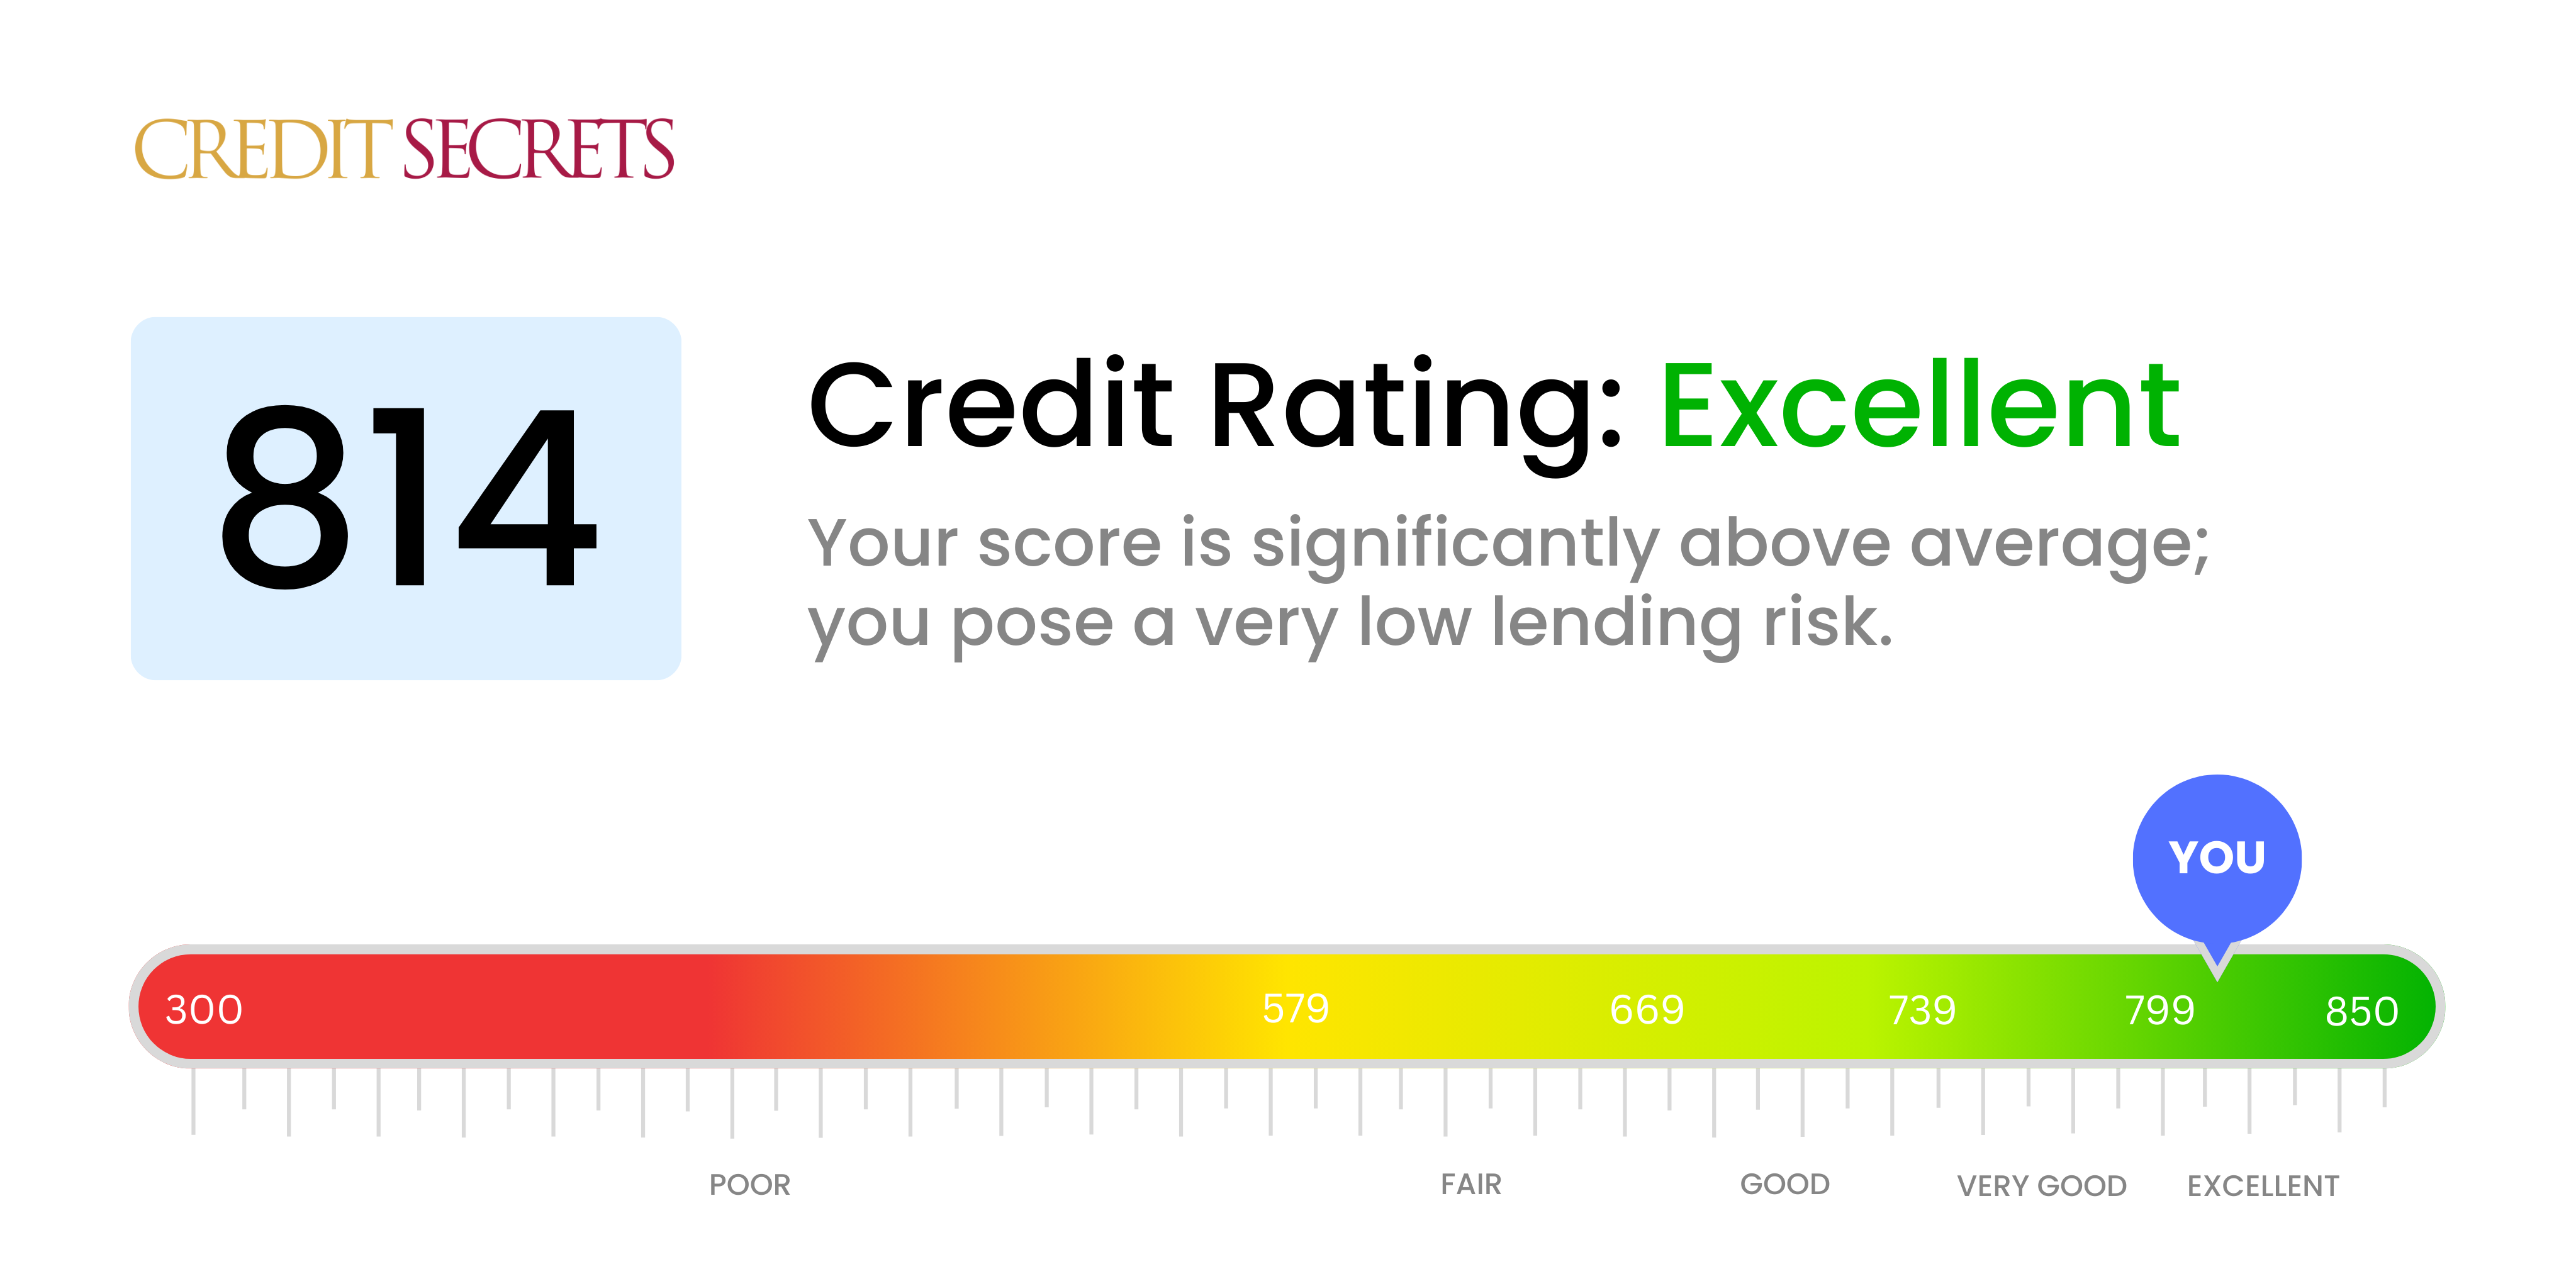 Is 814 a good credit score?